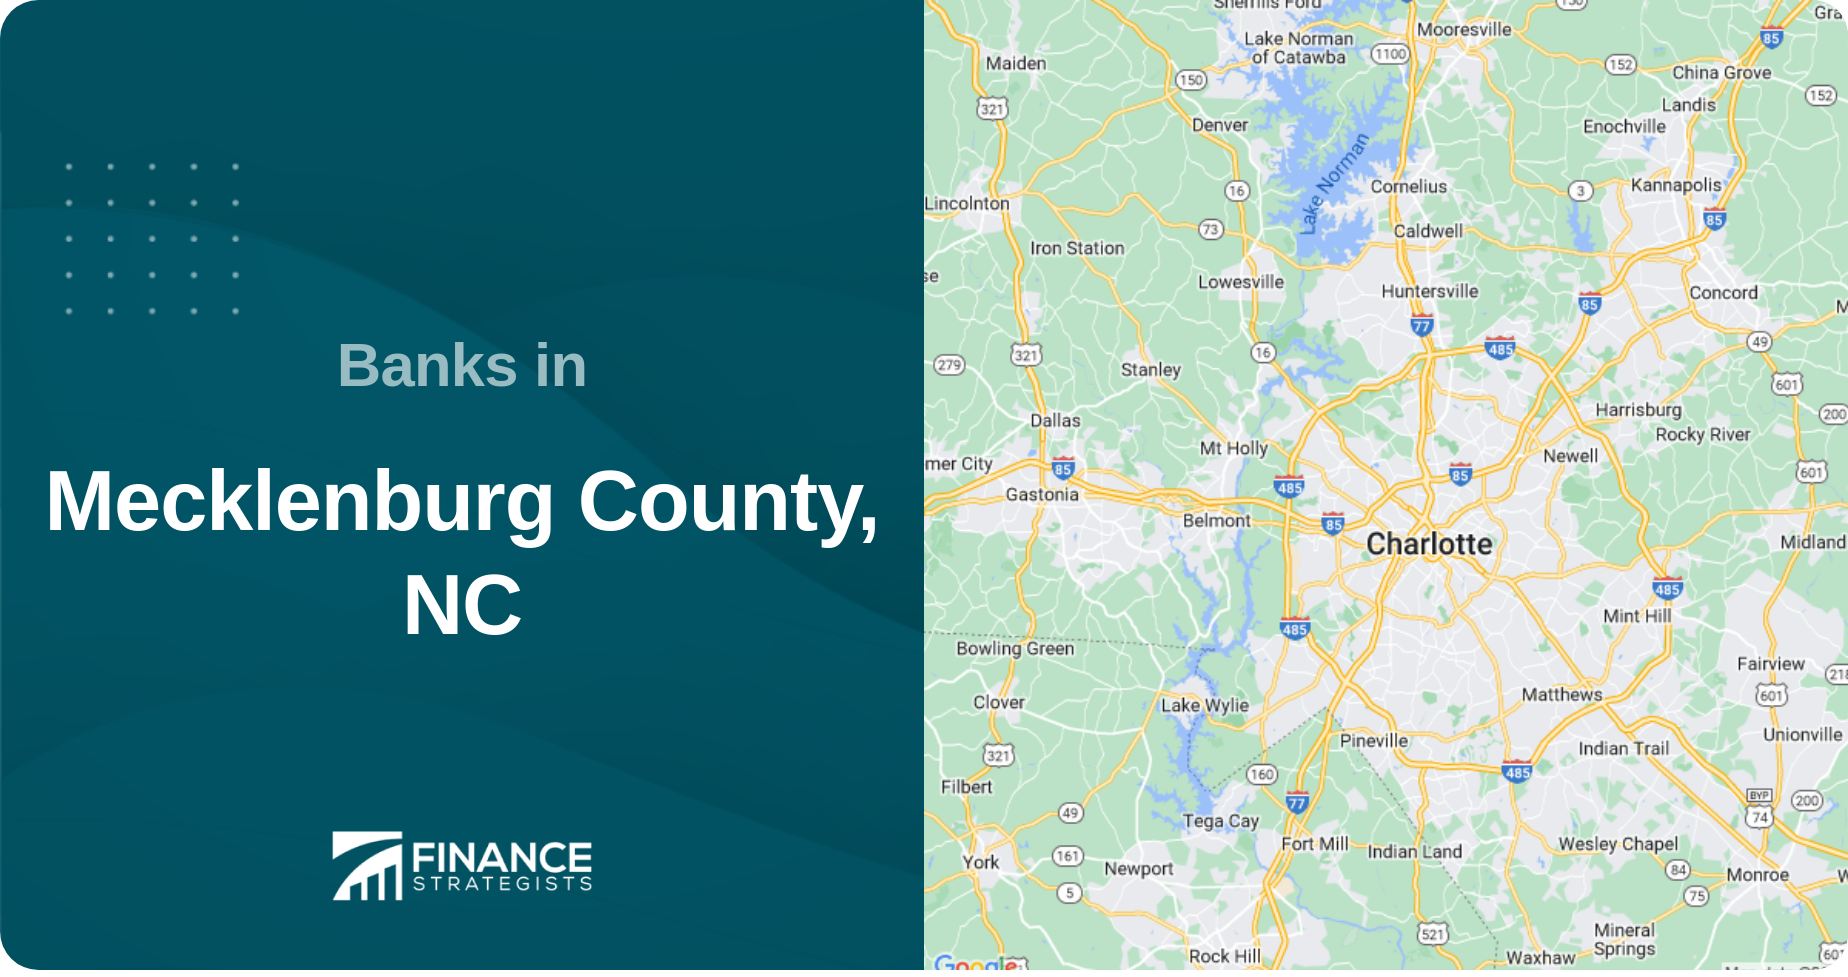 Banks in Mecklenburg County, NC